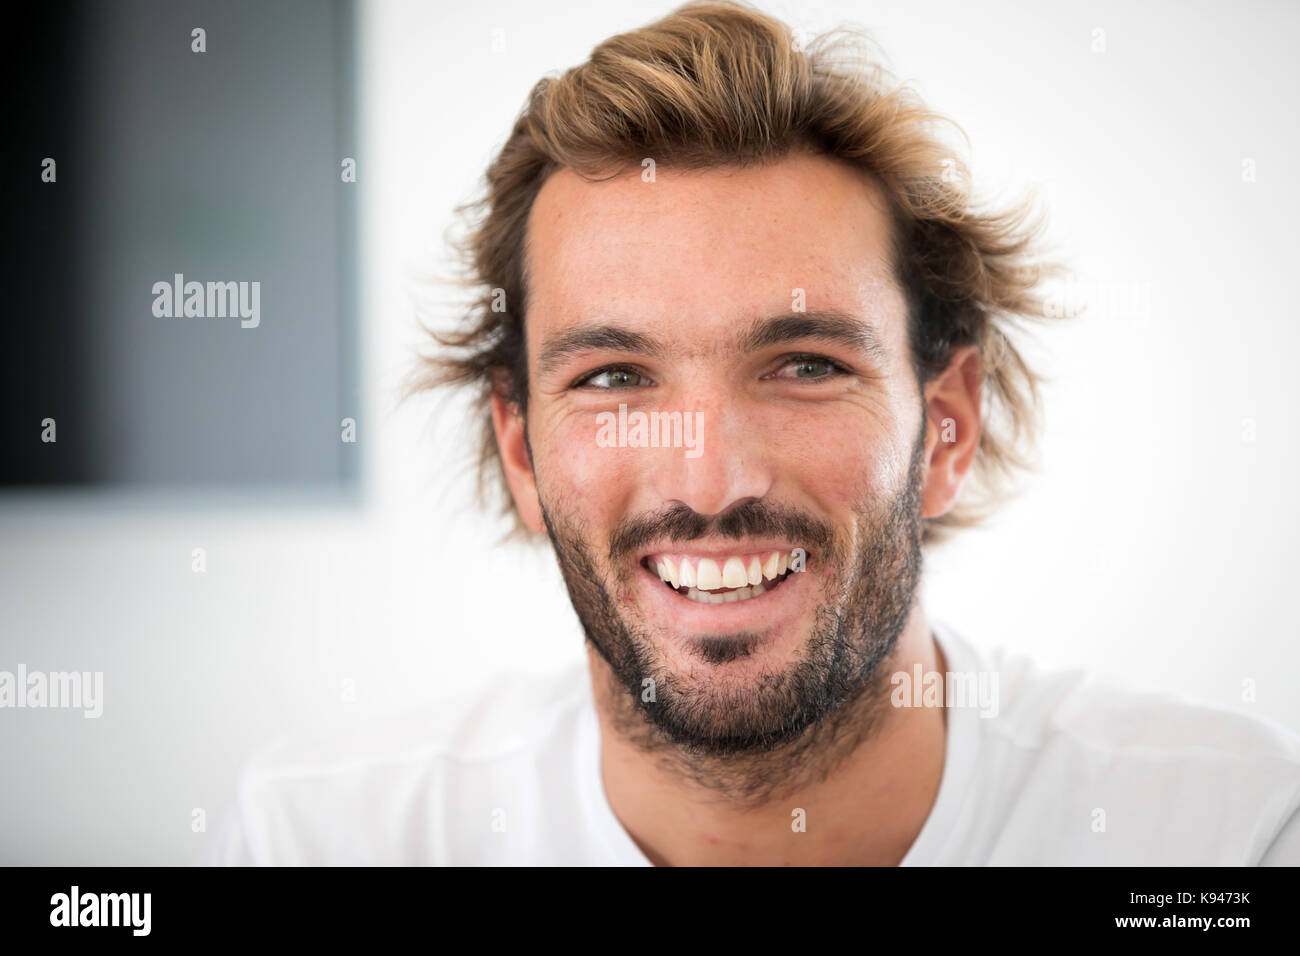 Frederico Morais, Portuguese professional surfer who competes on the World Surfing League, during an interview in Estoril, Portugal. Stock Photo